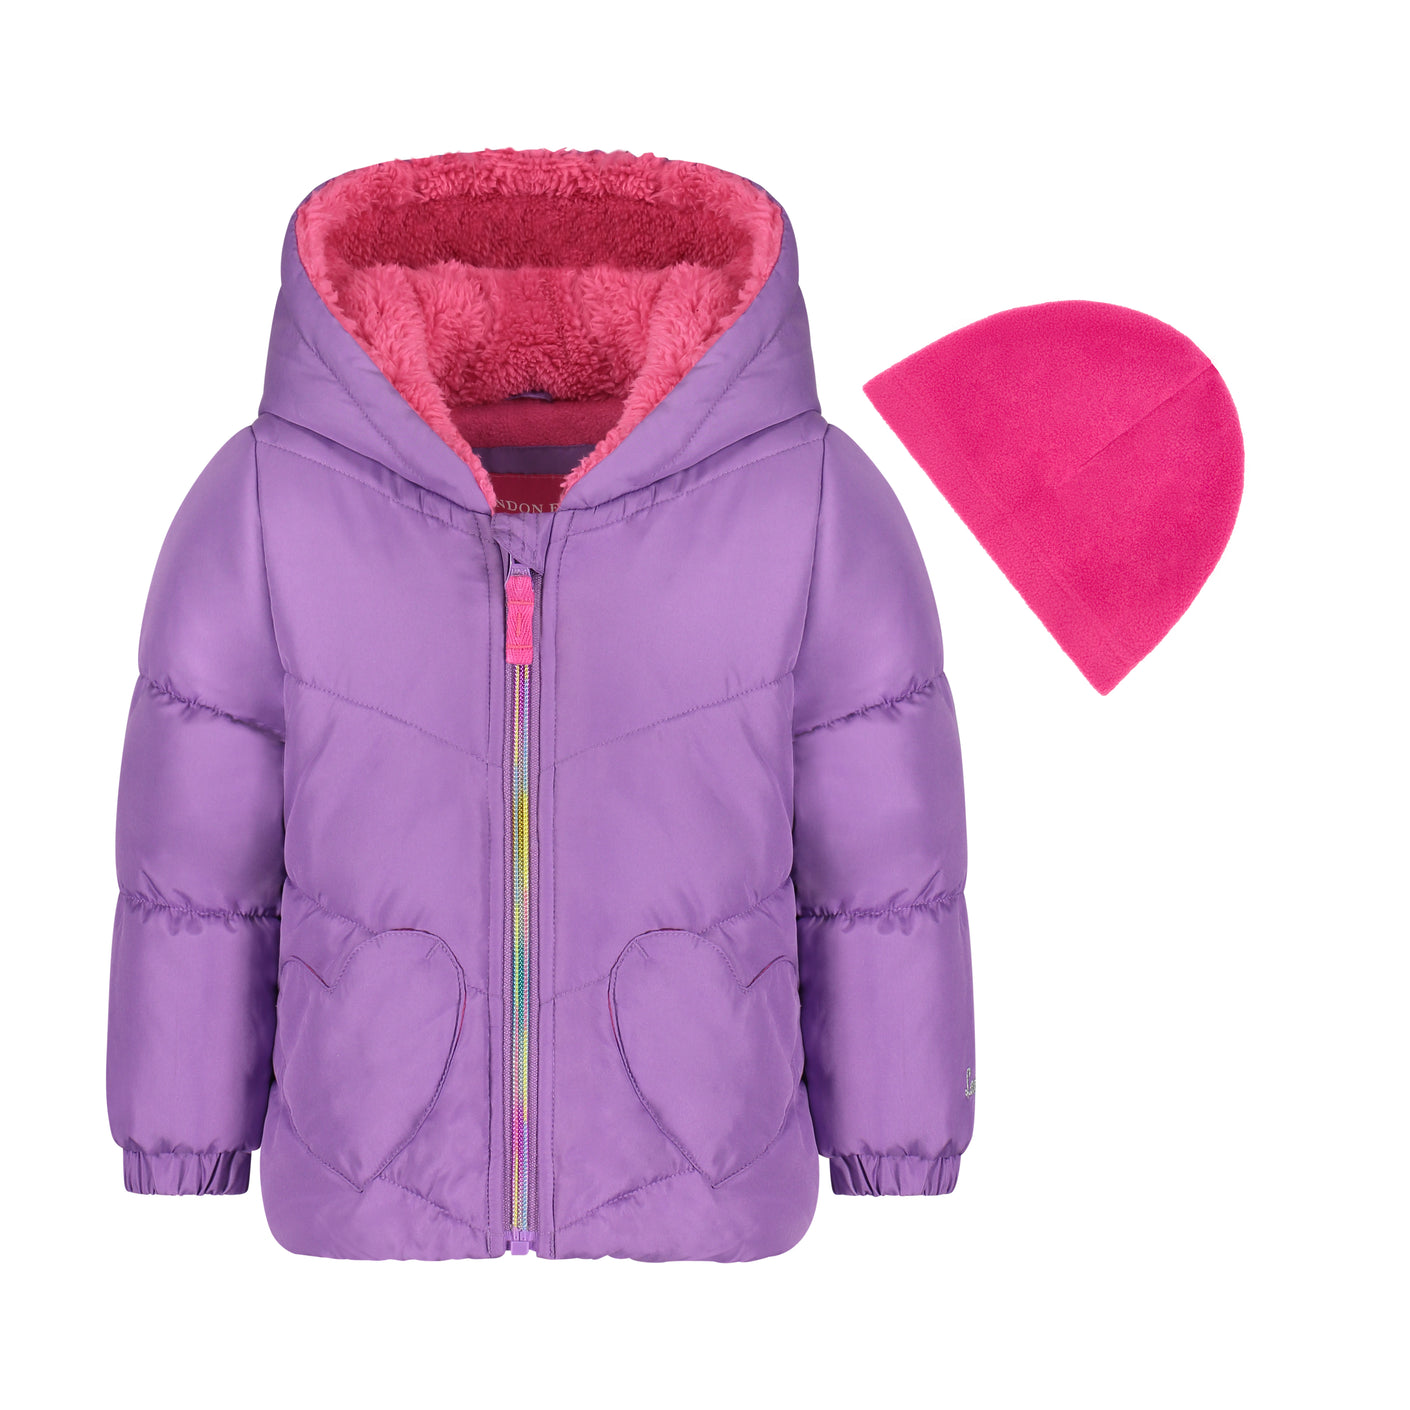 purple puffer jacket for girls with pink beanie